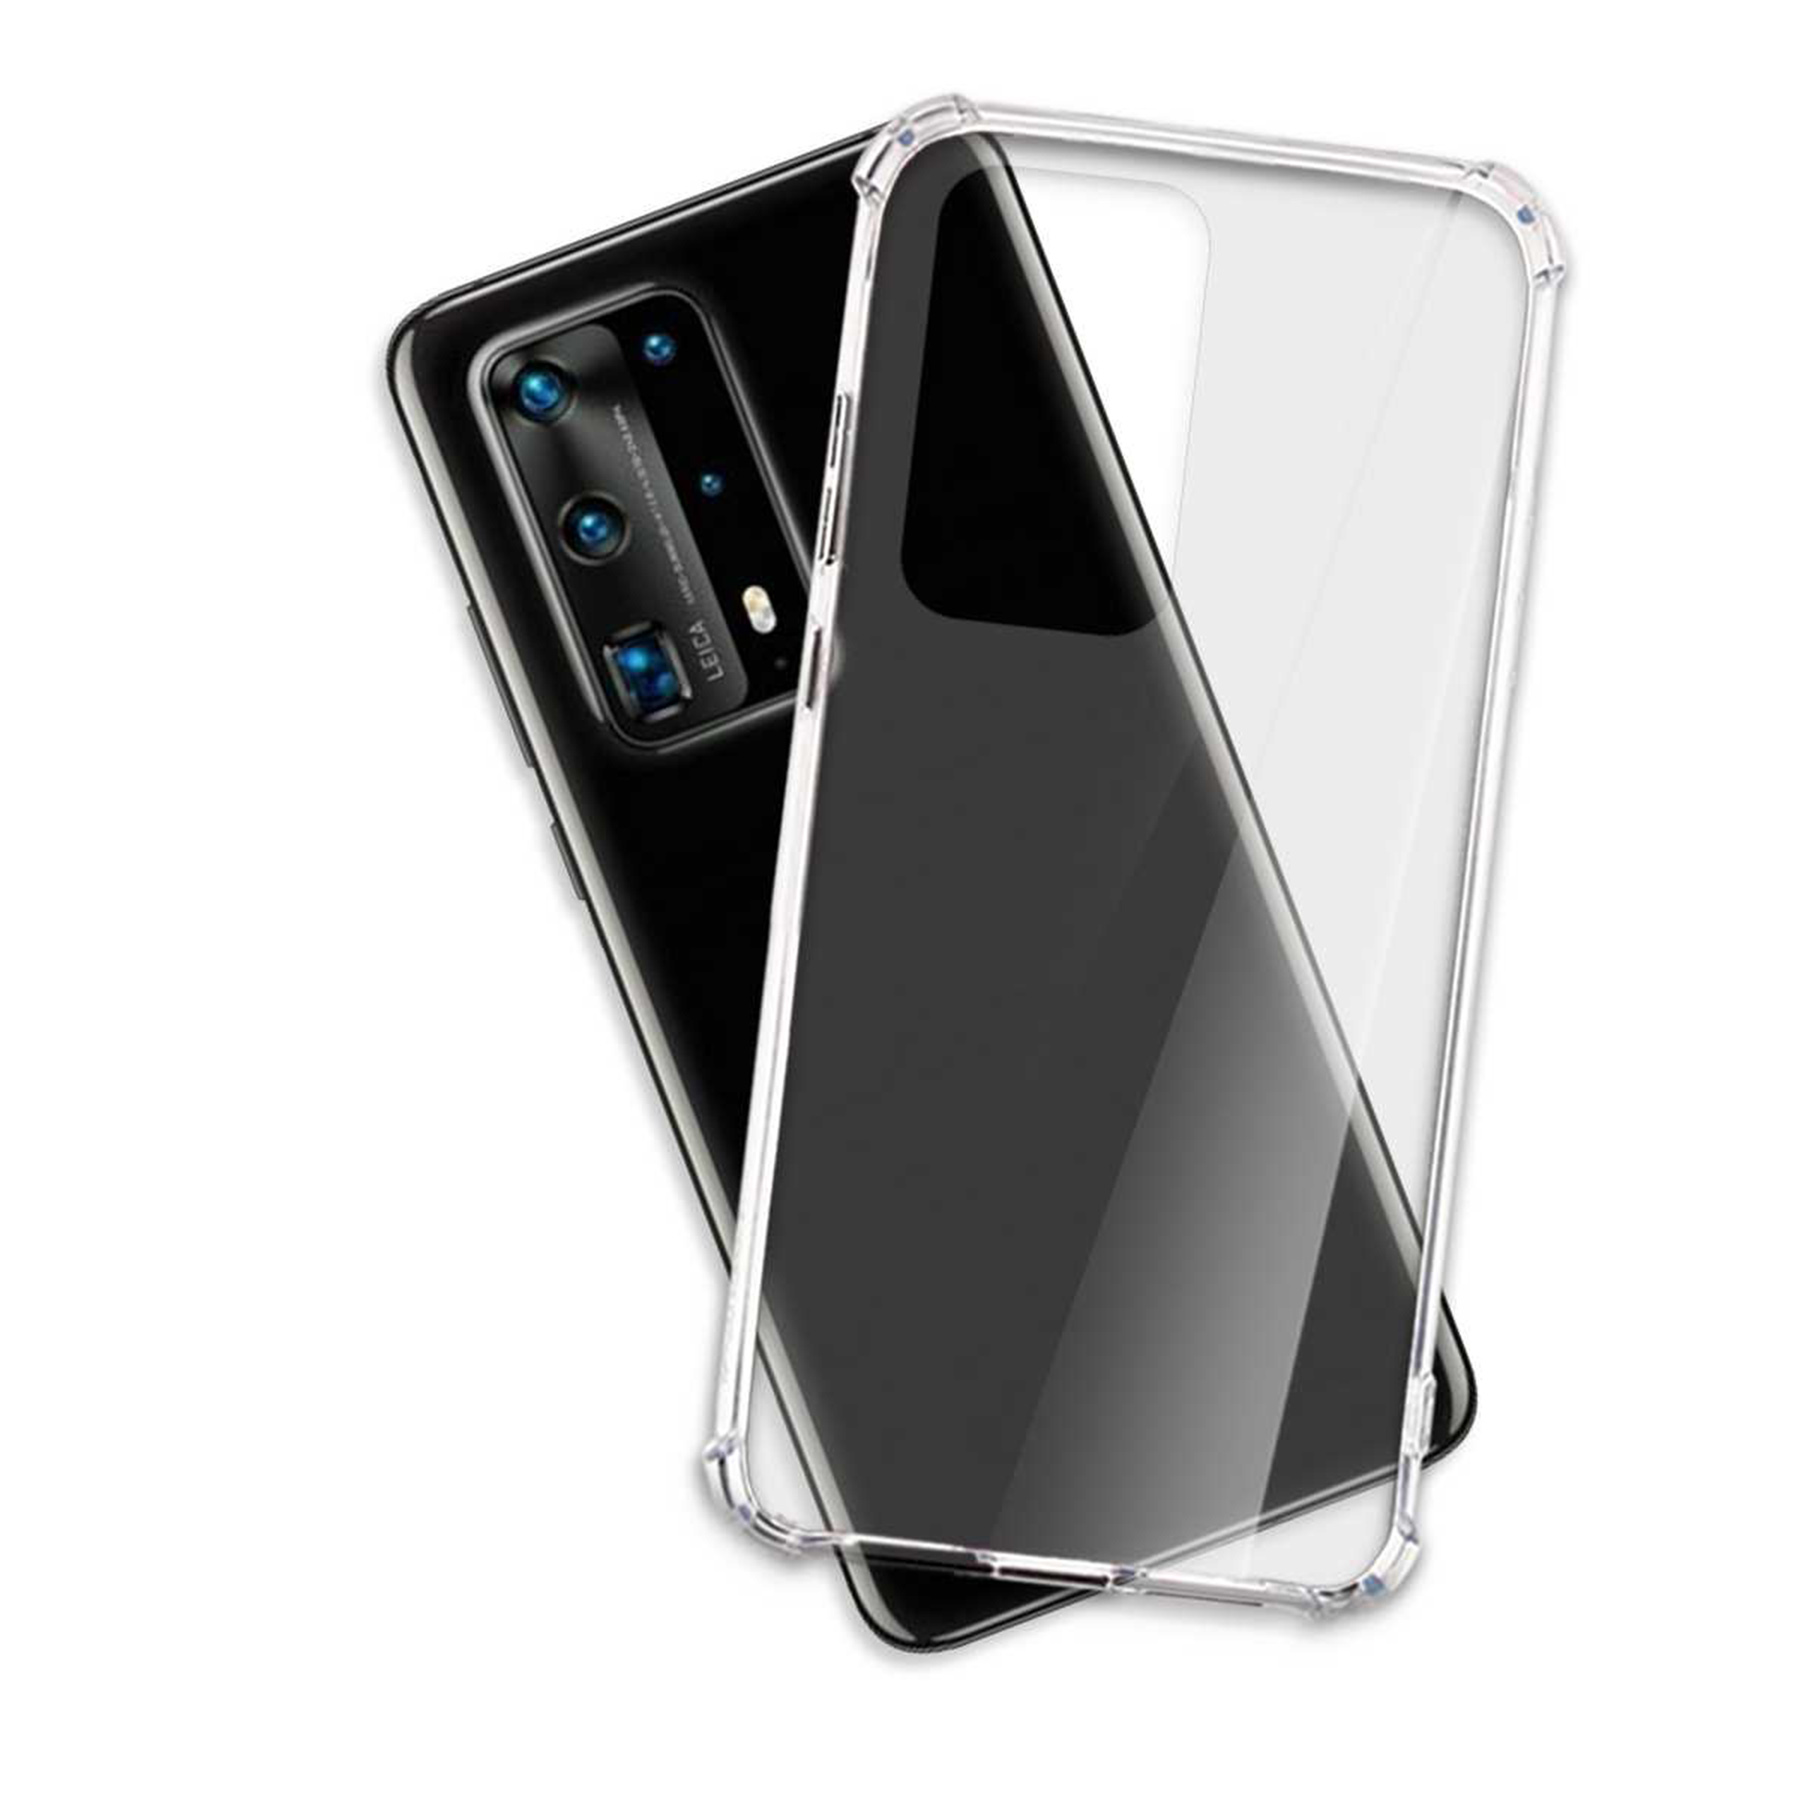 MTB Pro Plus MORE Transparent 5G, ENERGY P40 Huawei, Clear Backcover, Case, Armor